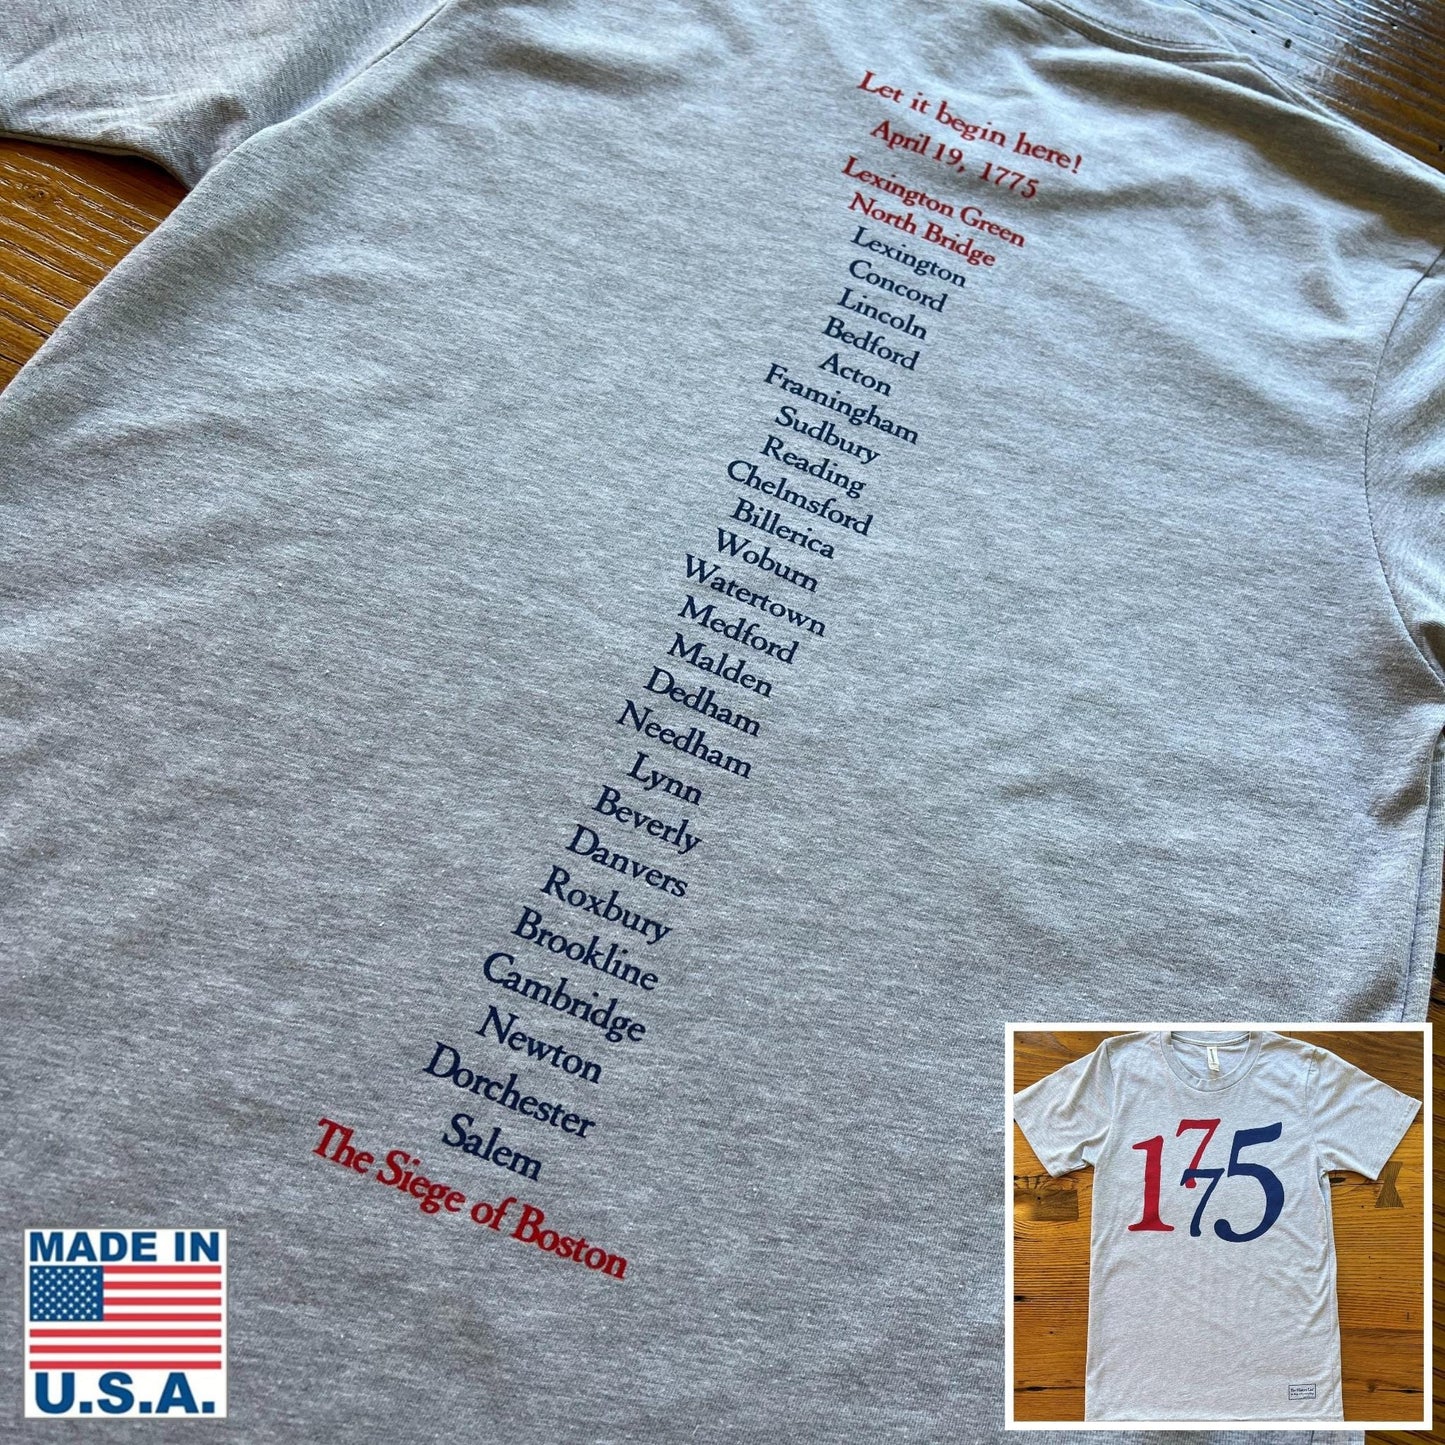 Lexington and Concord "1775" Shirt — Made in the USA in Heather grey from The History List store